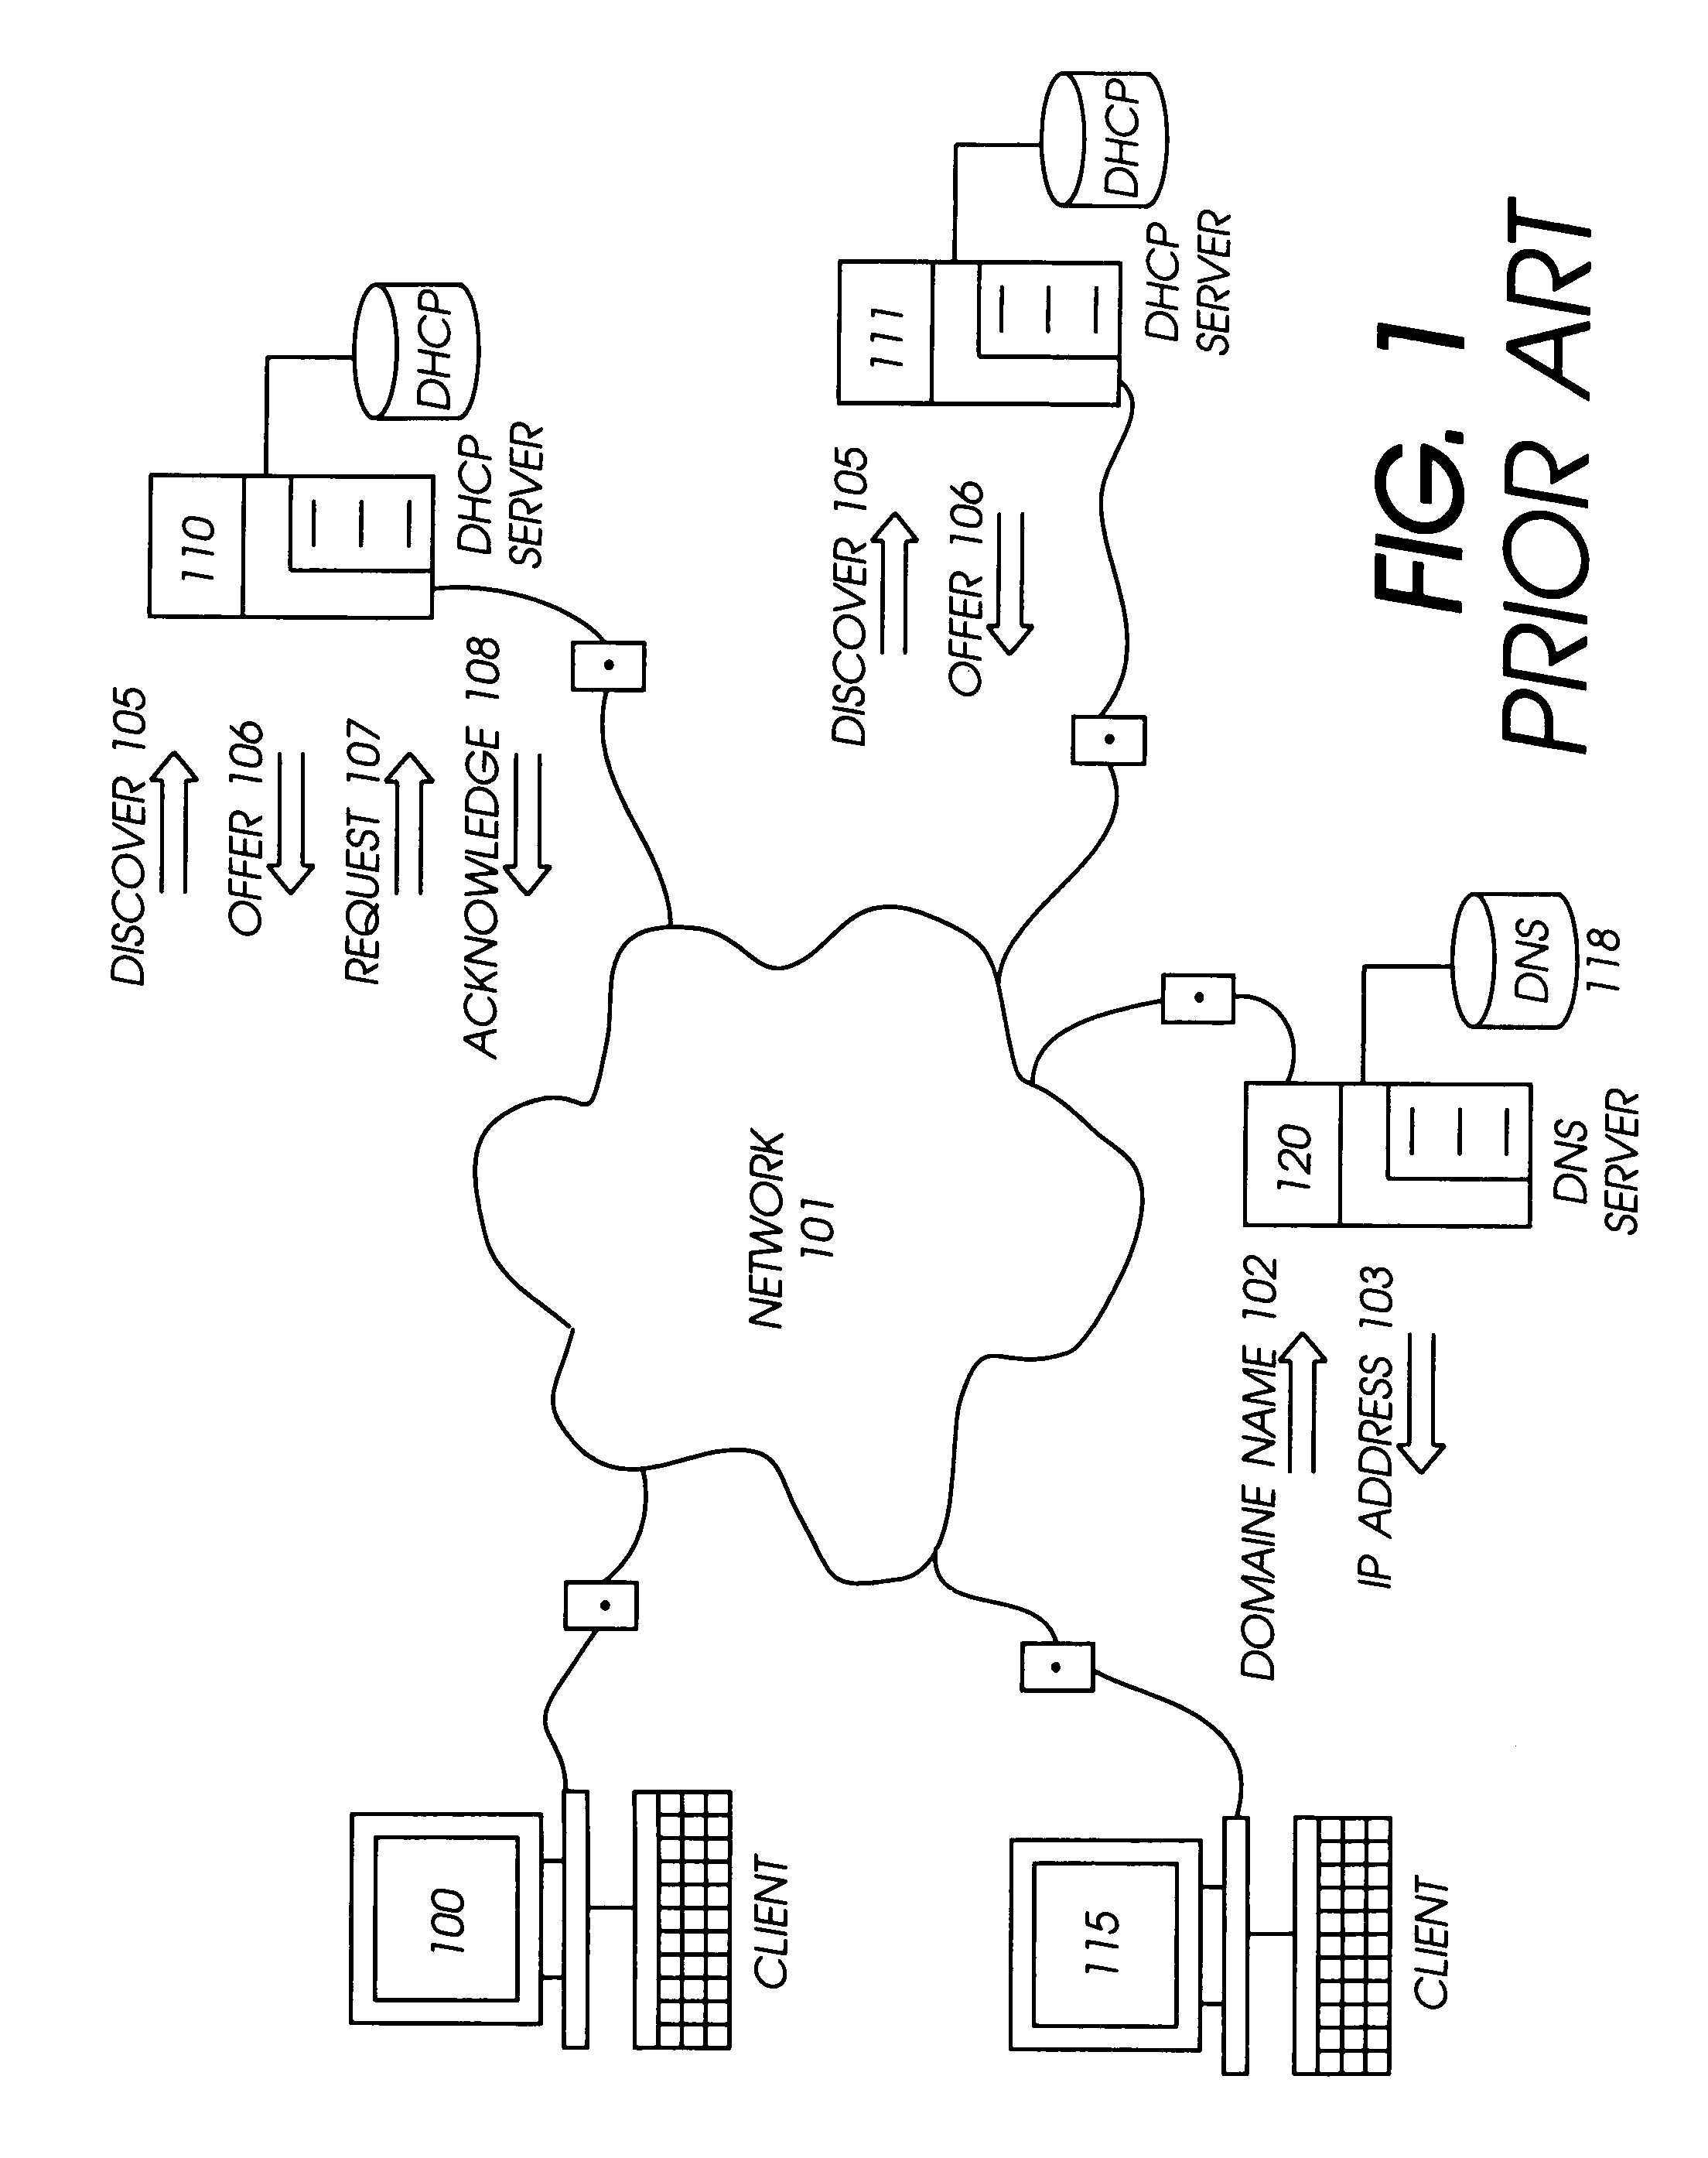 Method and apparatus for automatic network configuration